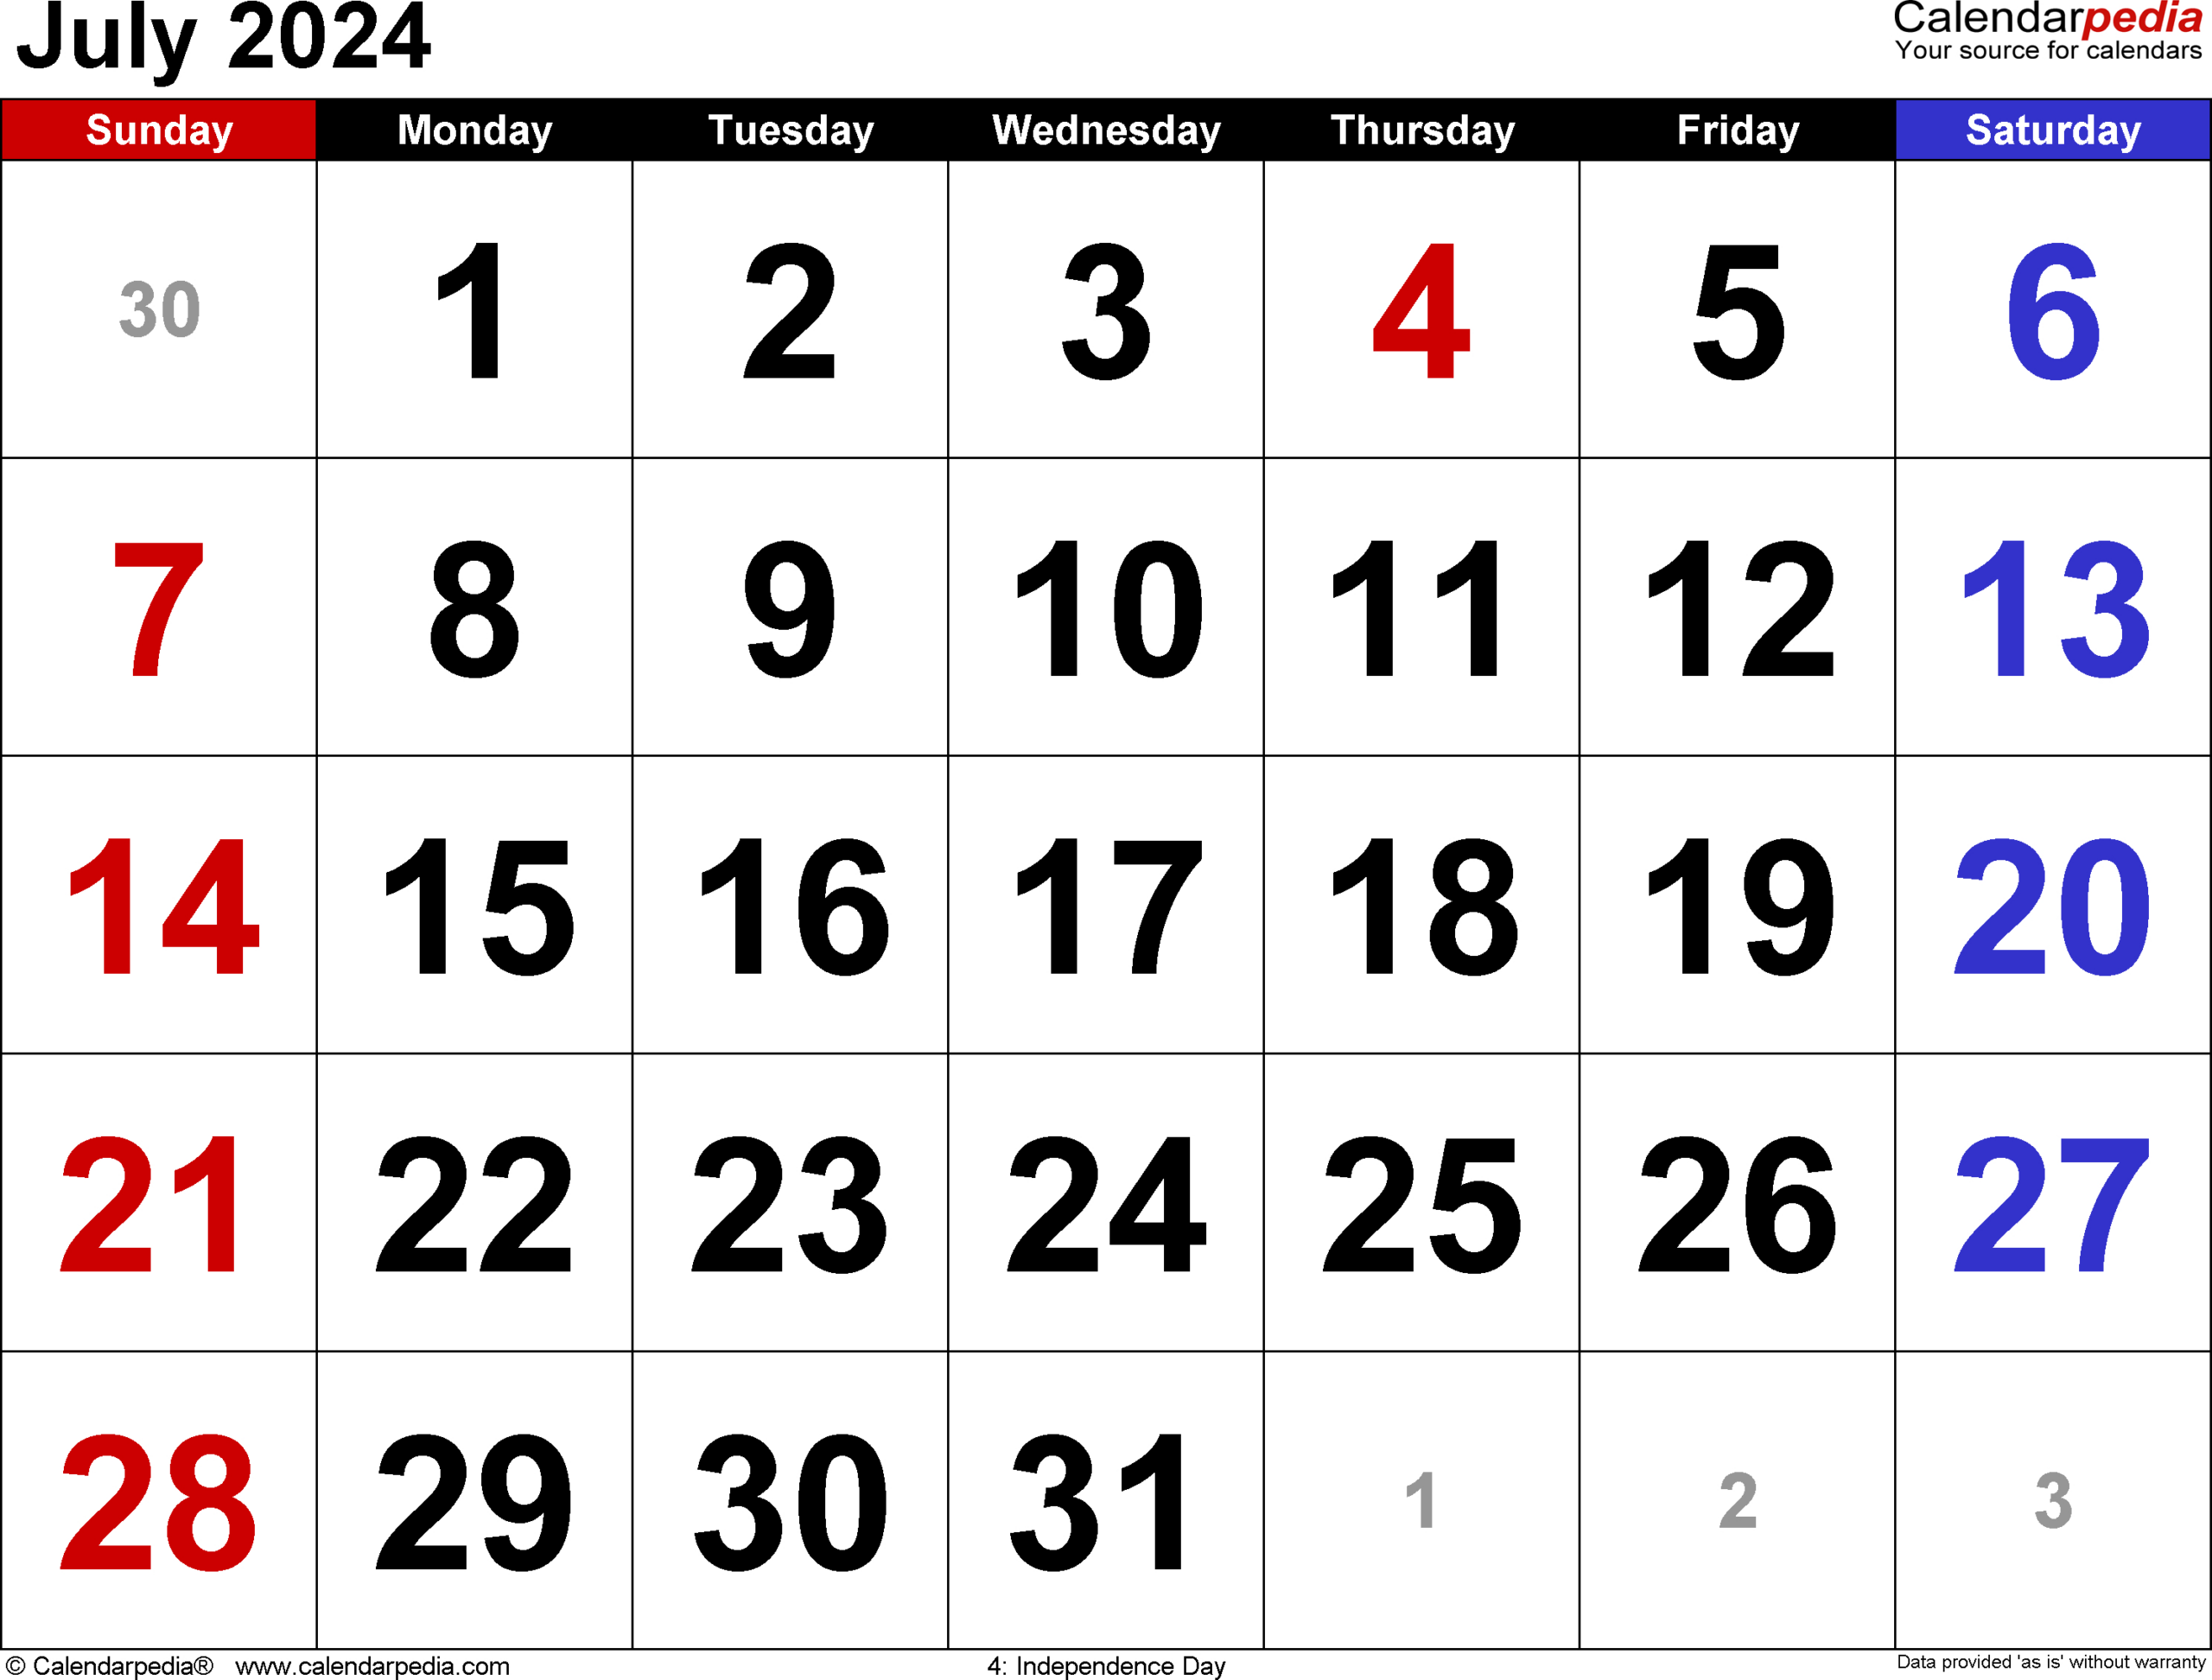 July 2024 Calendar | Templates For Word, Excel And Pdf for July Calendar 2024 Word